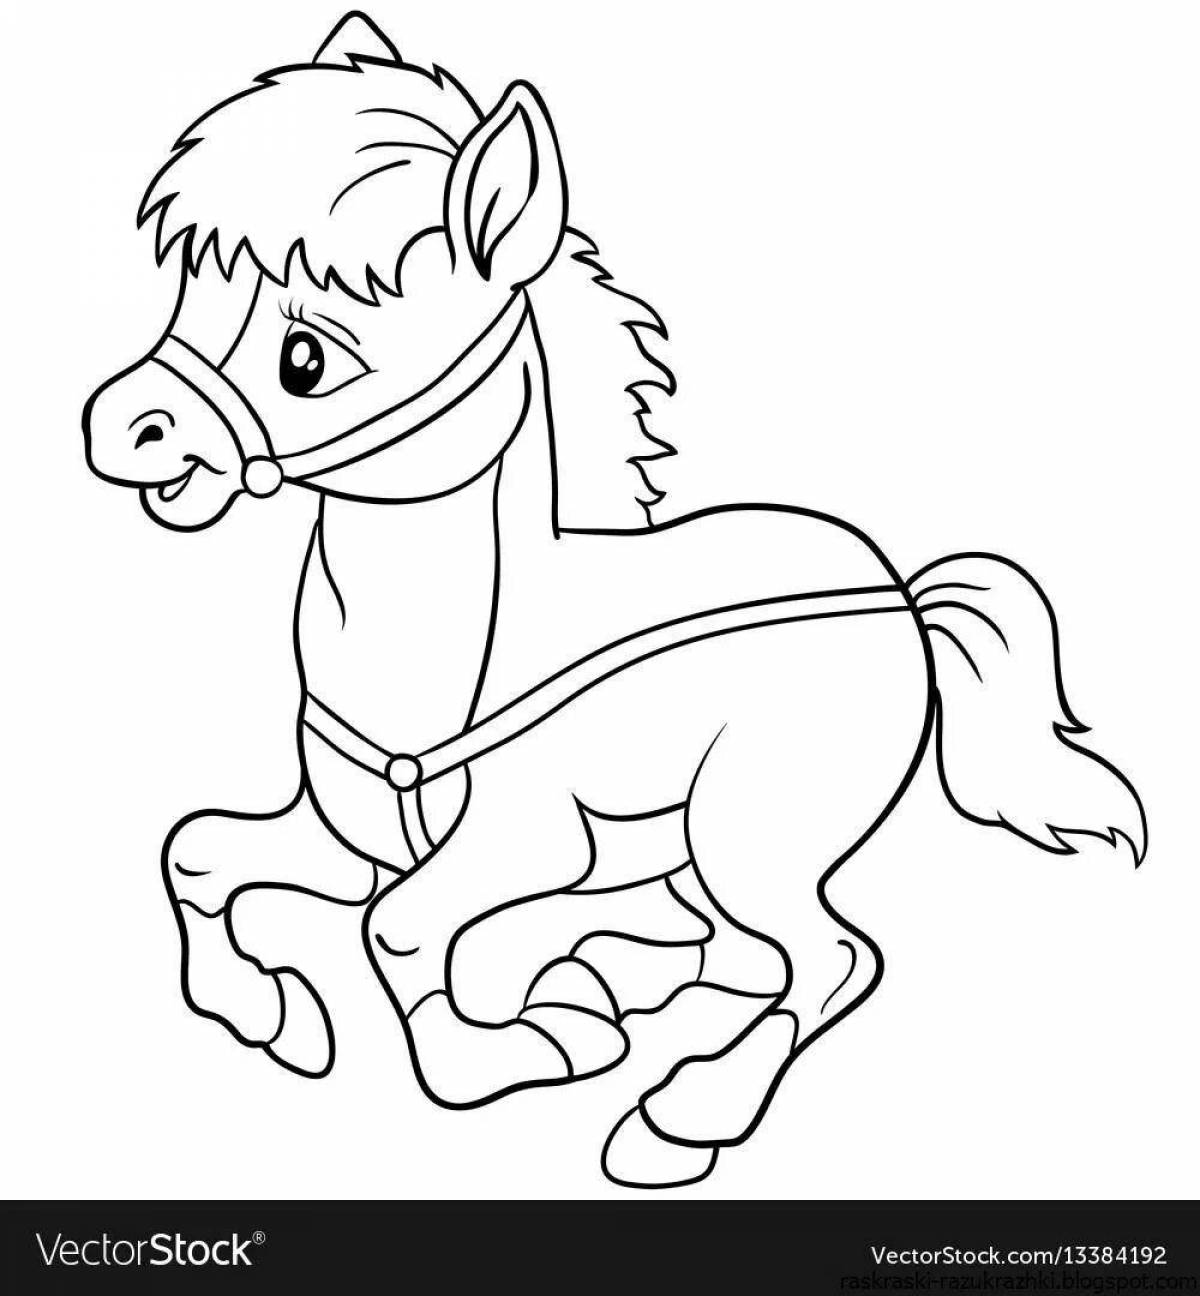 Fancy horse coloring book for kids 6-7 years old